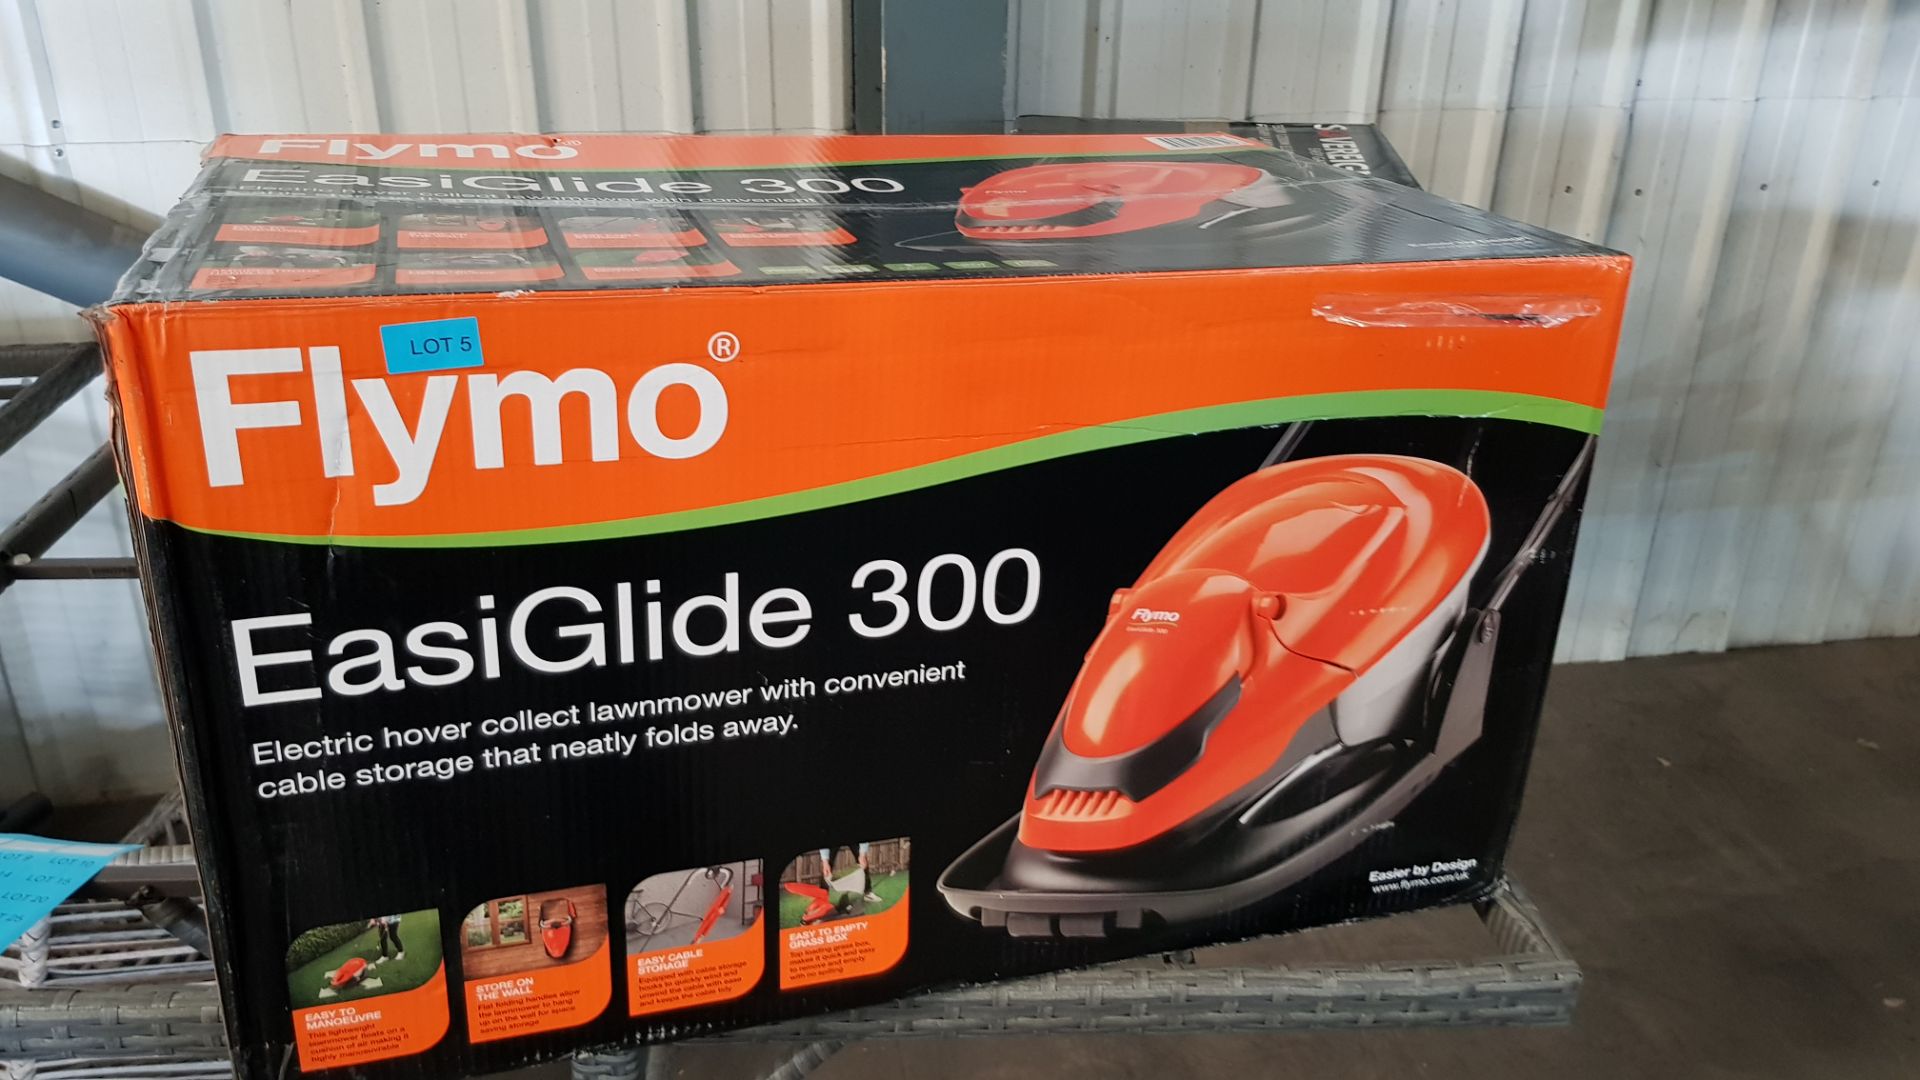 (P8) 1x Flymo EasiGlide 300 RRP £99. Hover Collect Lawnmower. New, Sealed Item. - Image 3 of 3